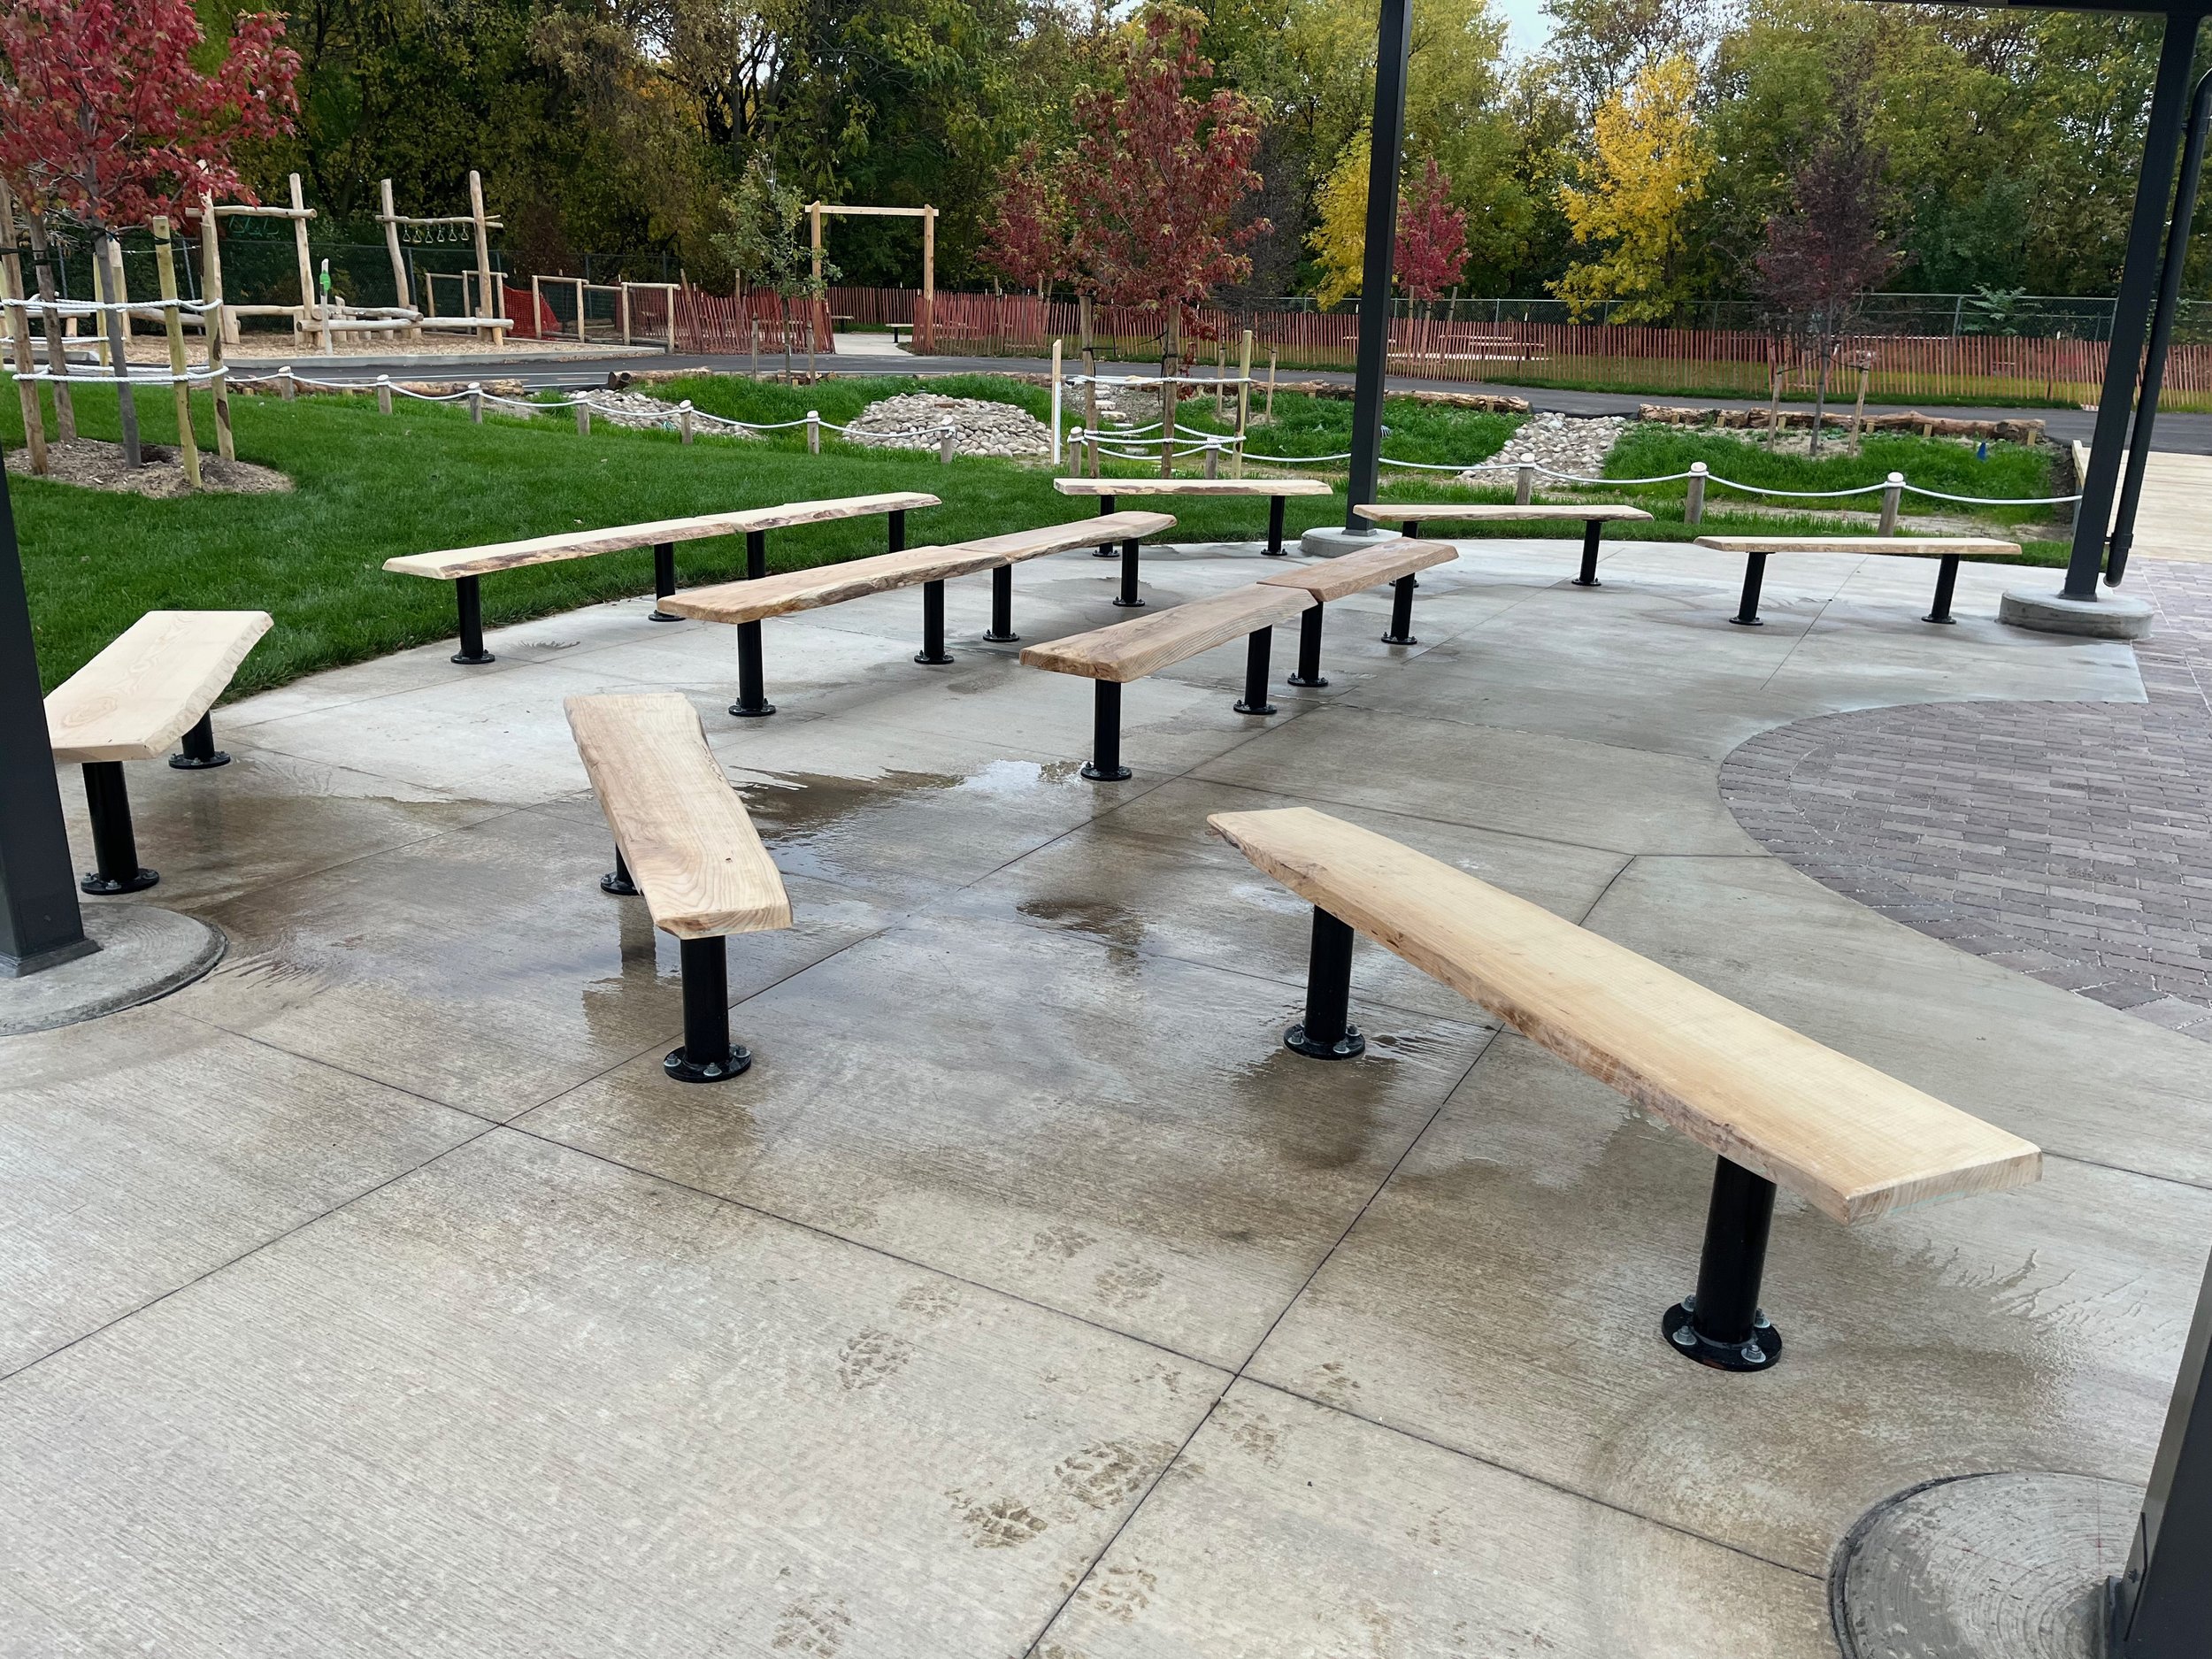 Outdoor classroom with urban wood benches at a redeveloped schoolyard